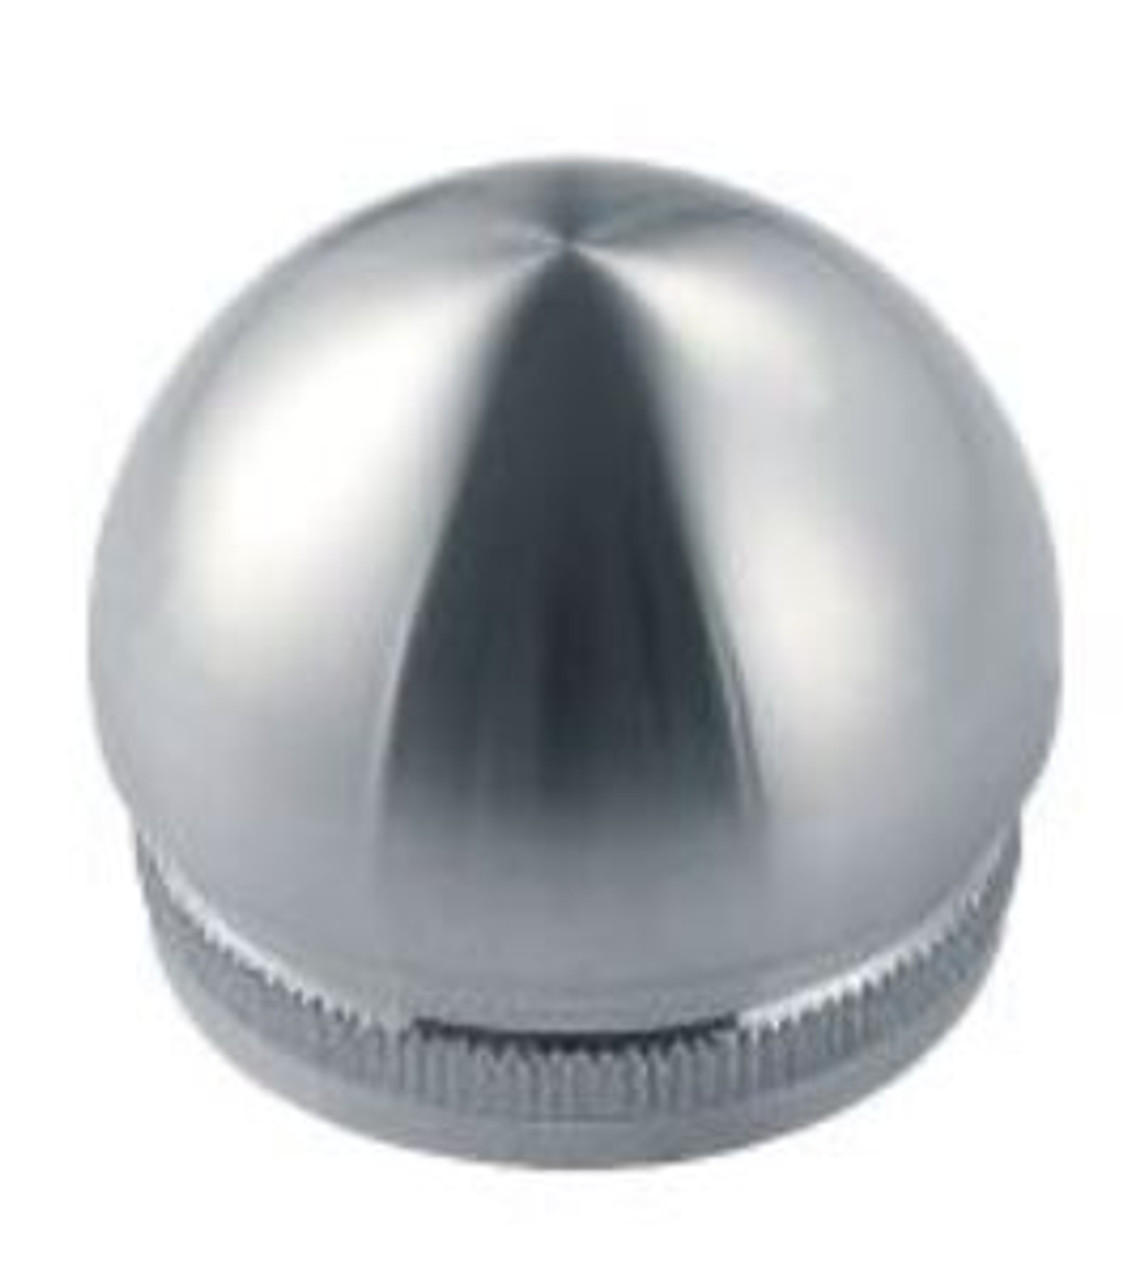 EC621038HDOBS - BL END CAP ROUND DOME SS 316 FOR 38.1 MM DIA PIPE & 1.5 MM